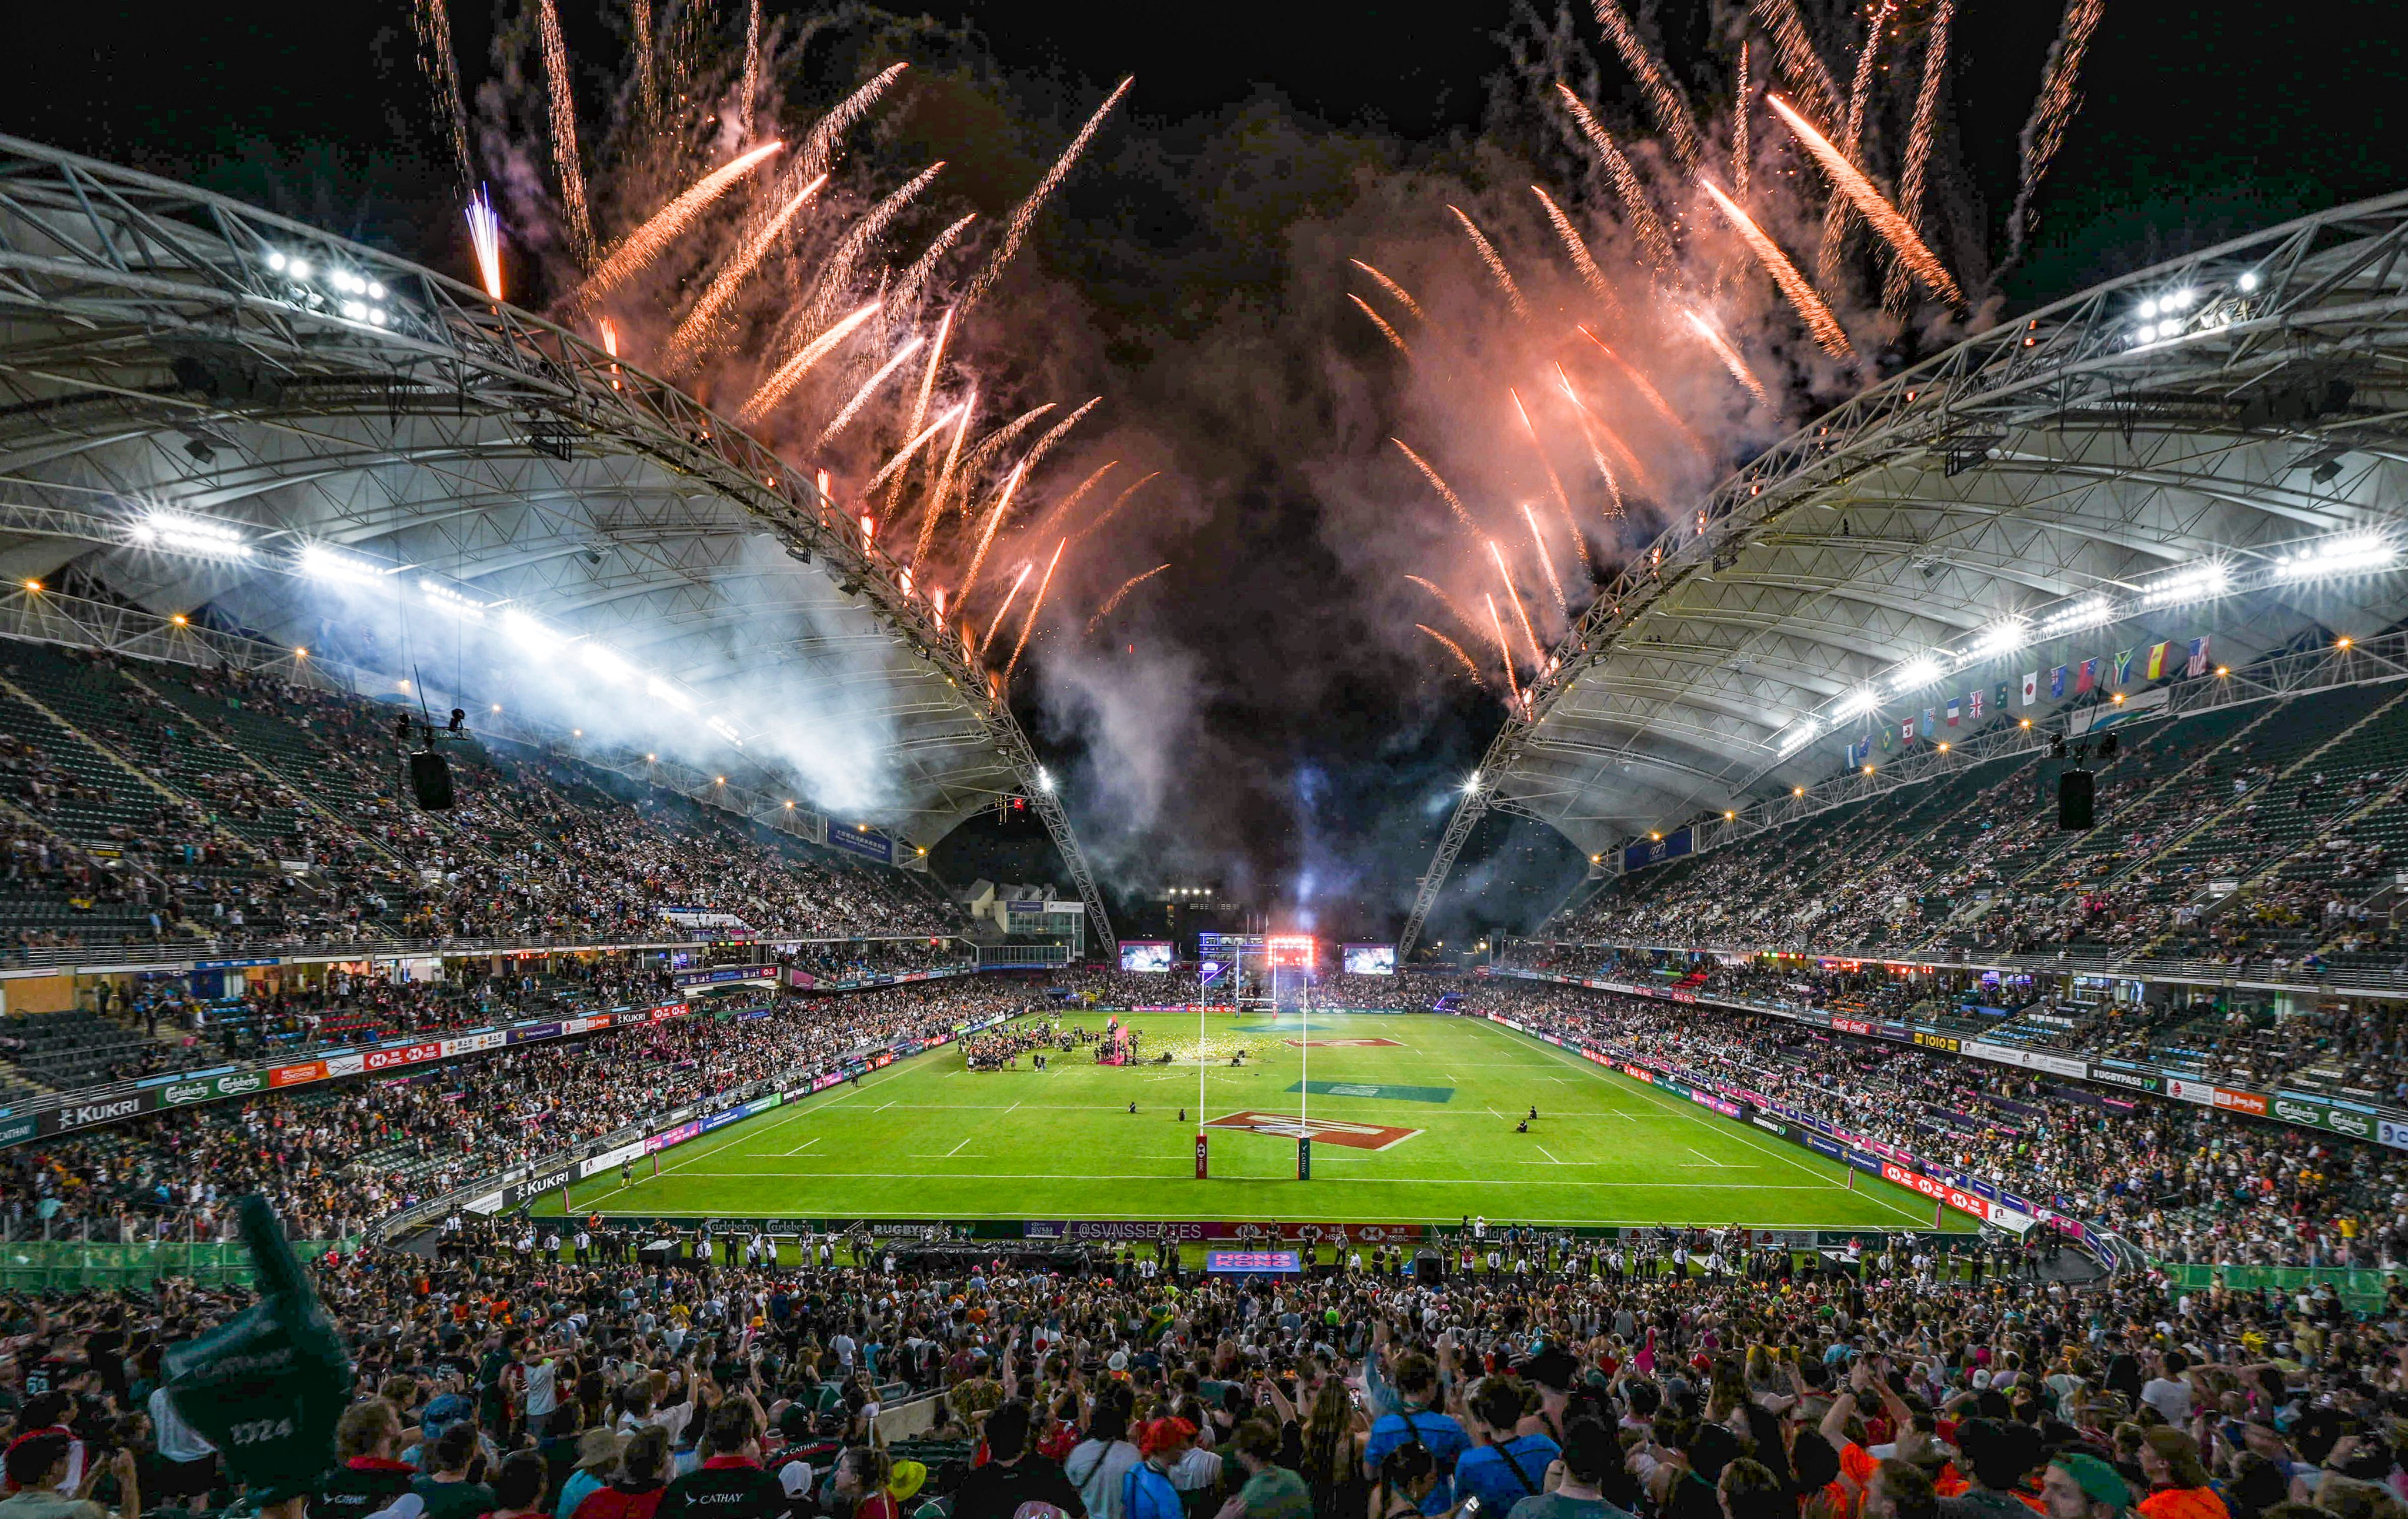 Fireworks are set off on the final day of the Cathay/HSBC Hong Kong Rugby Sevens at the Hong Kong Stadium on Sunday. Photo: Eugene Lee